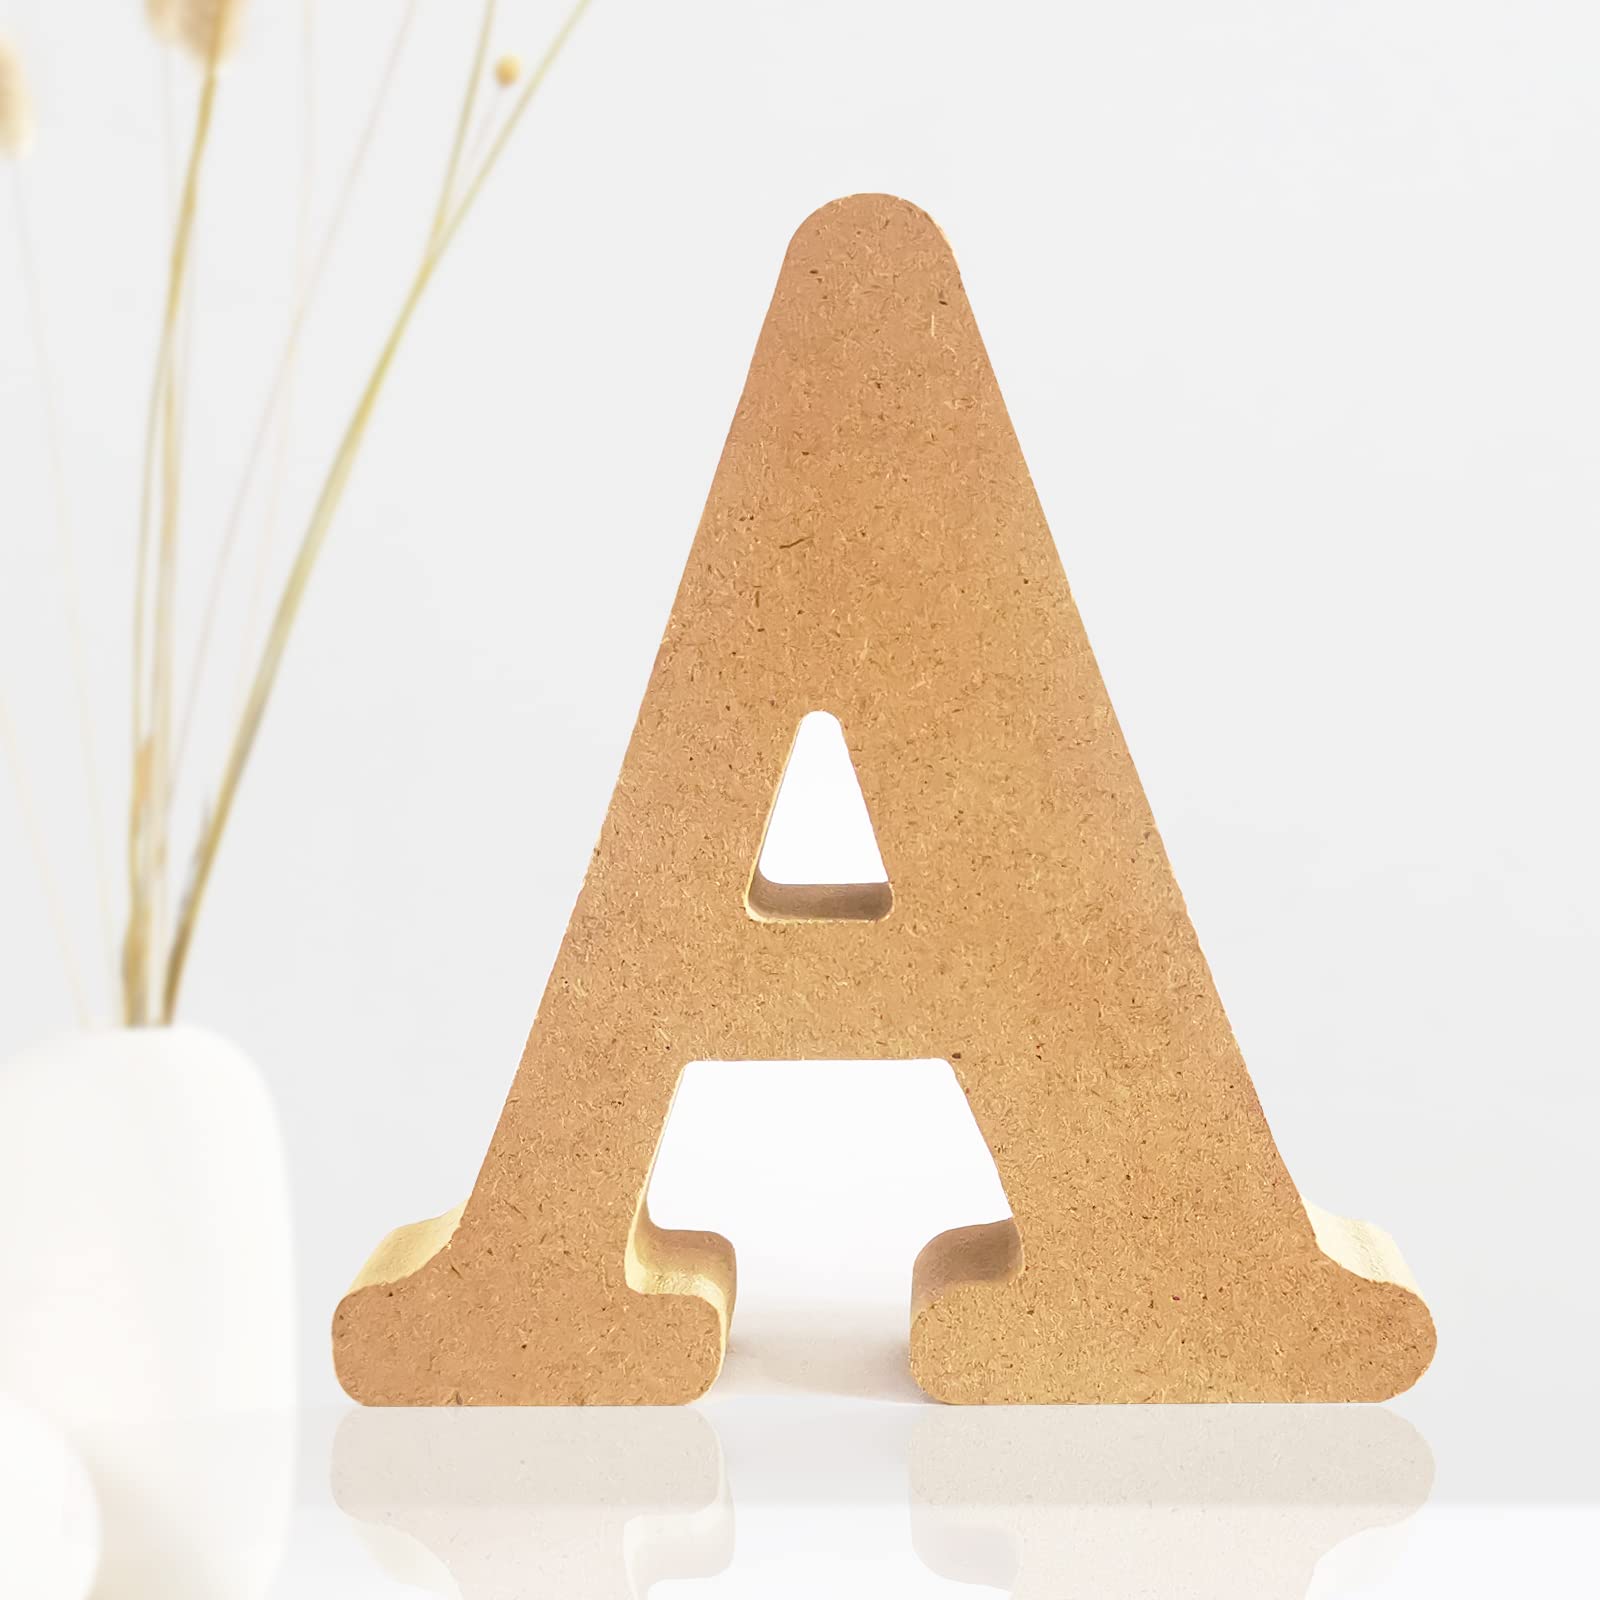  AOCEAN 6 Inch White Wood Letters Unfinished Wood